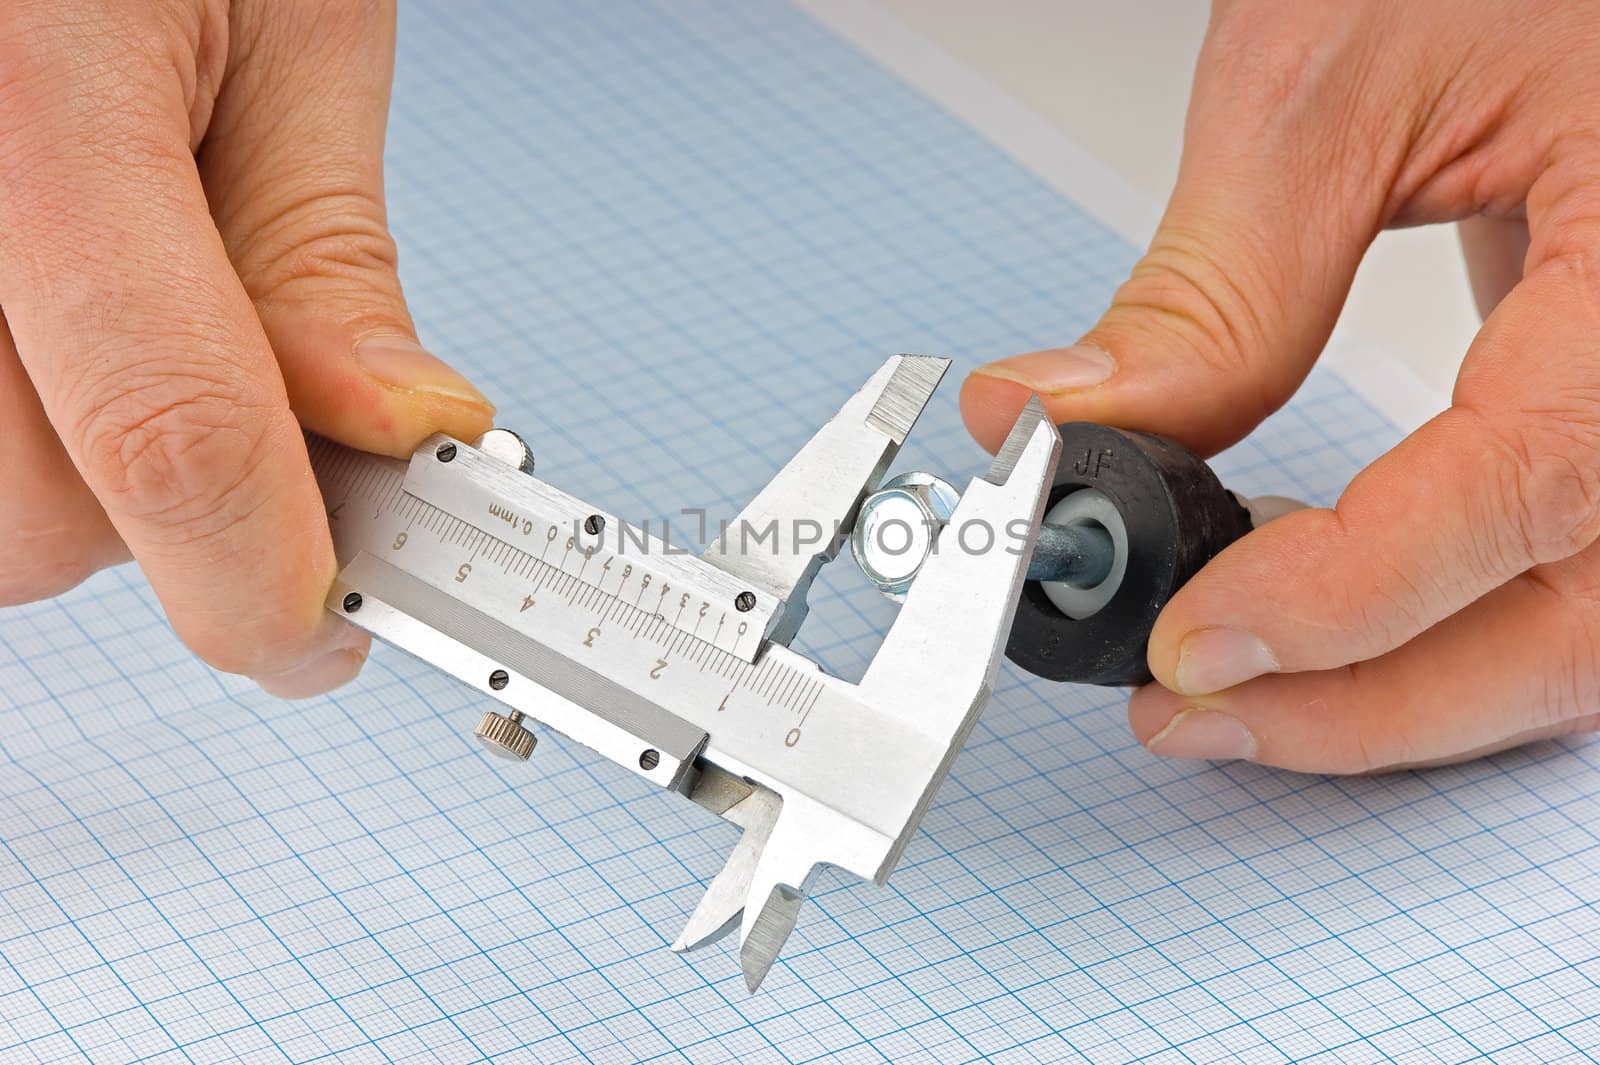 caliper measures the detail on the background of graph paper